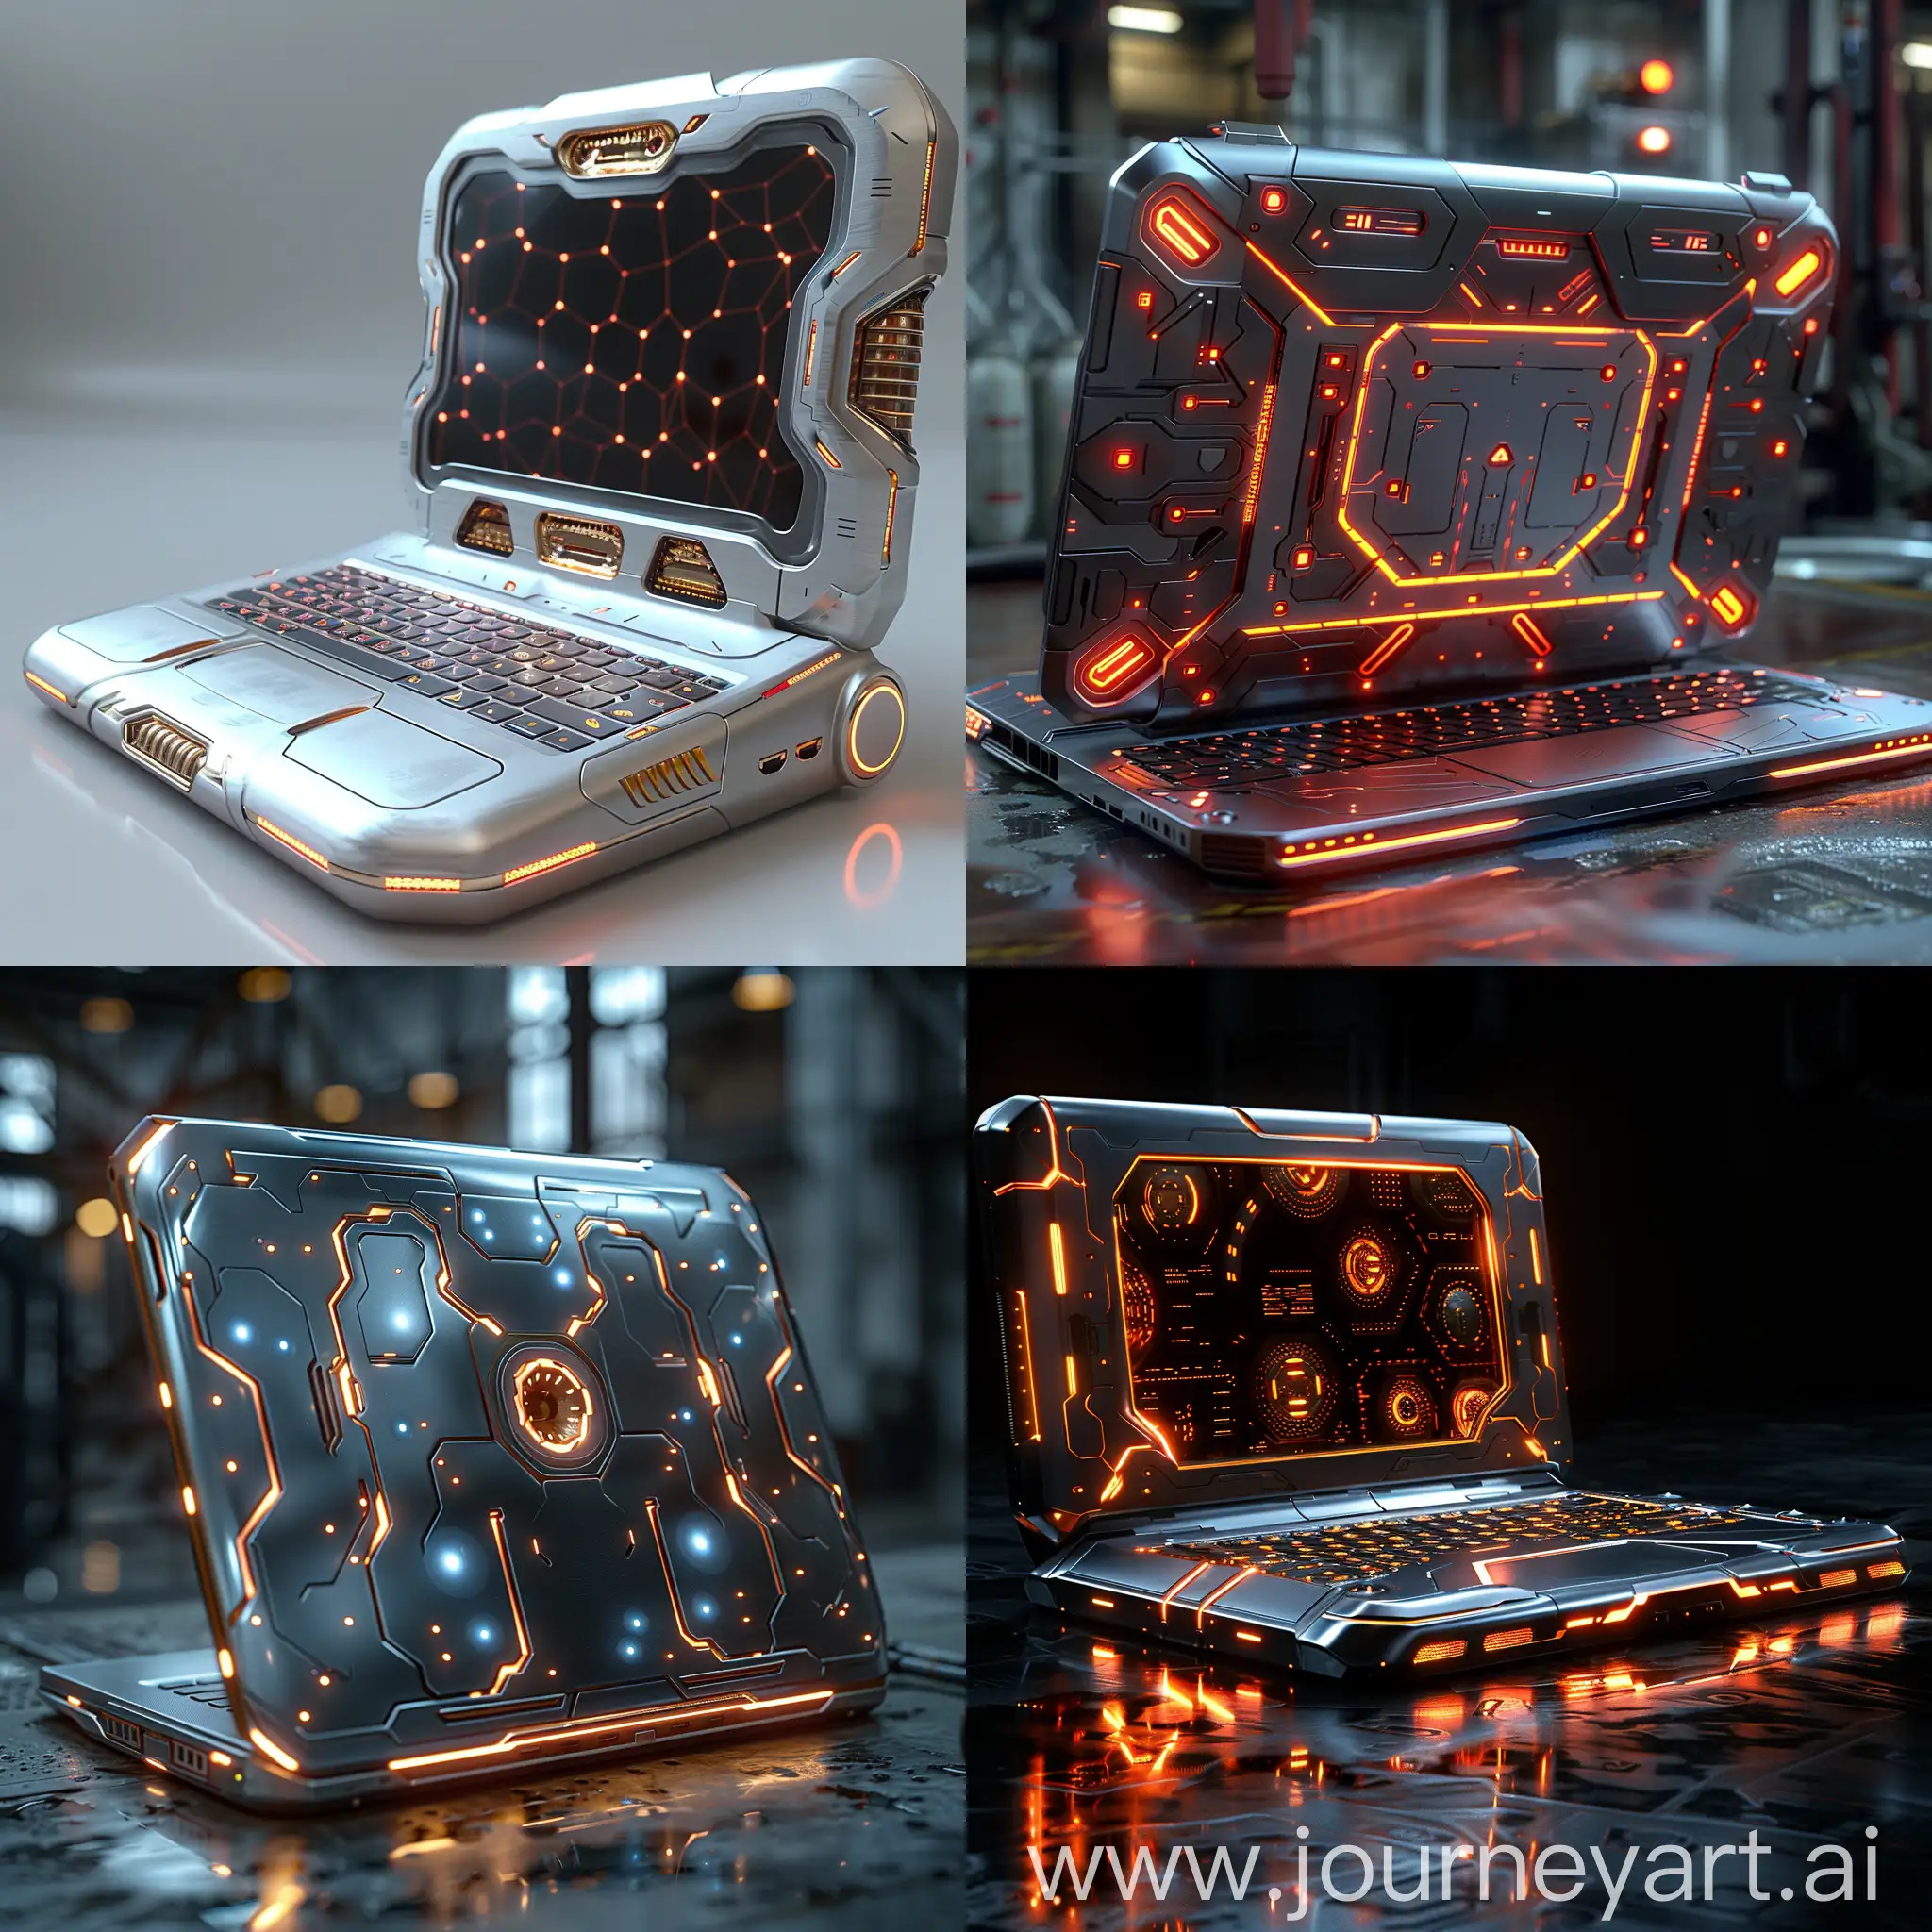 Futuristic-Stainless-Steel-Laptop-with-Recyclable-Smart-Materials